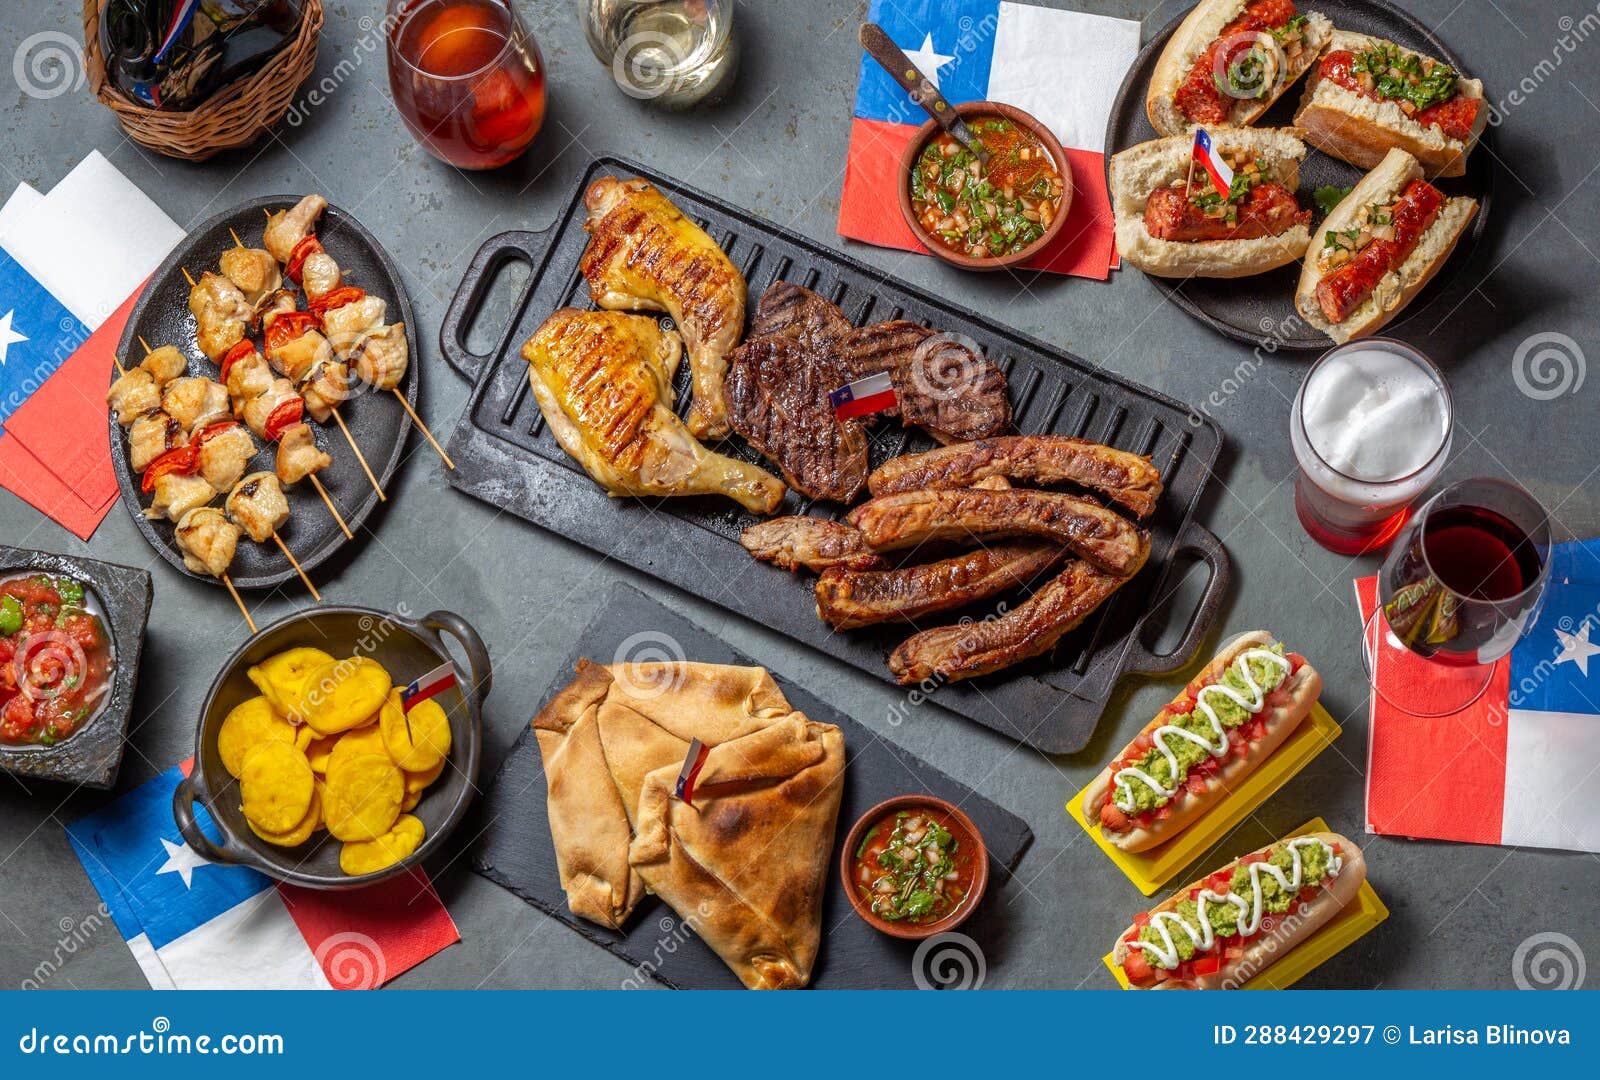 chilean independence day table with traditional festive food for fiestas patrias. dish and drink on 18 september party.